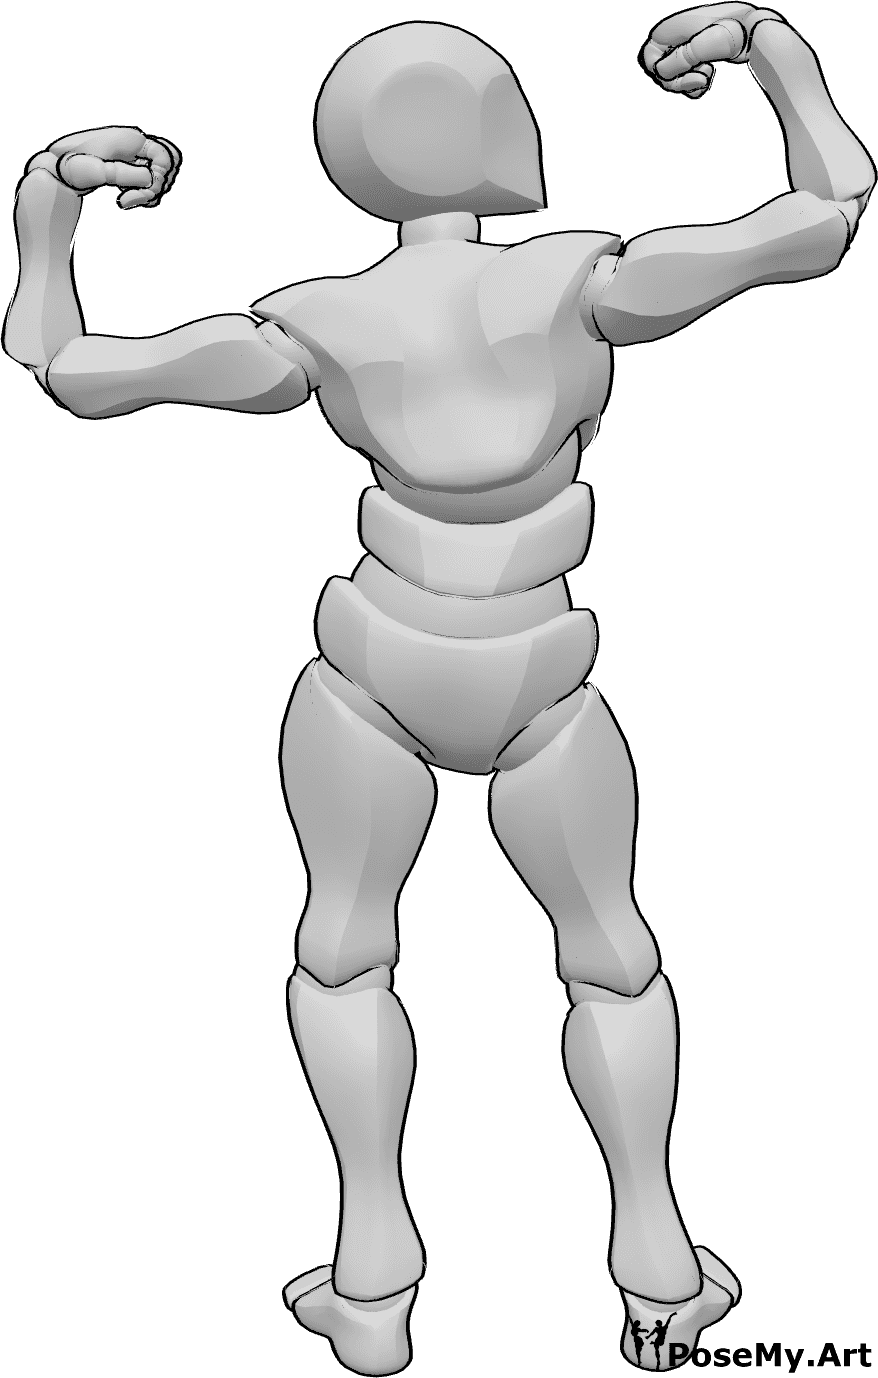 Pose Reference - Back muscles pose - Male bodybuilder is showing his back muscles